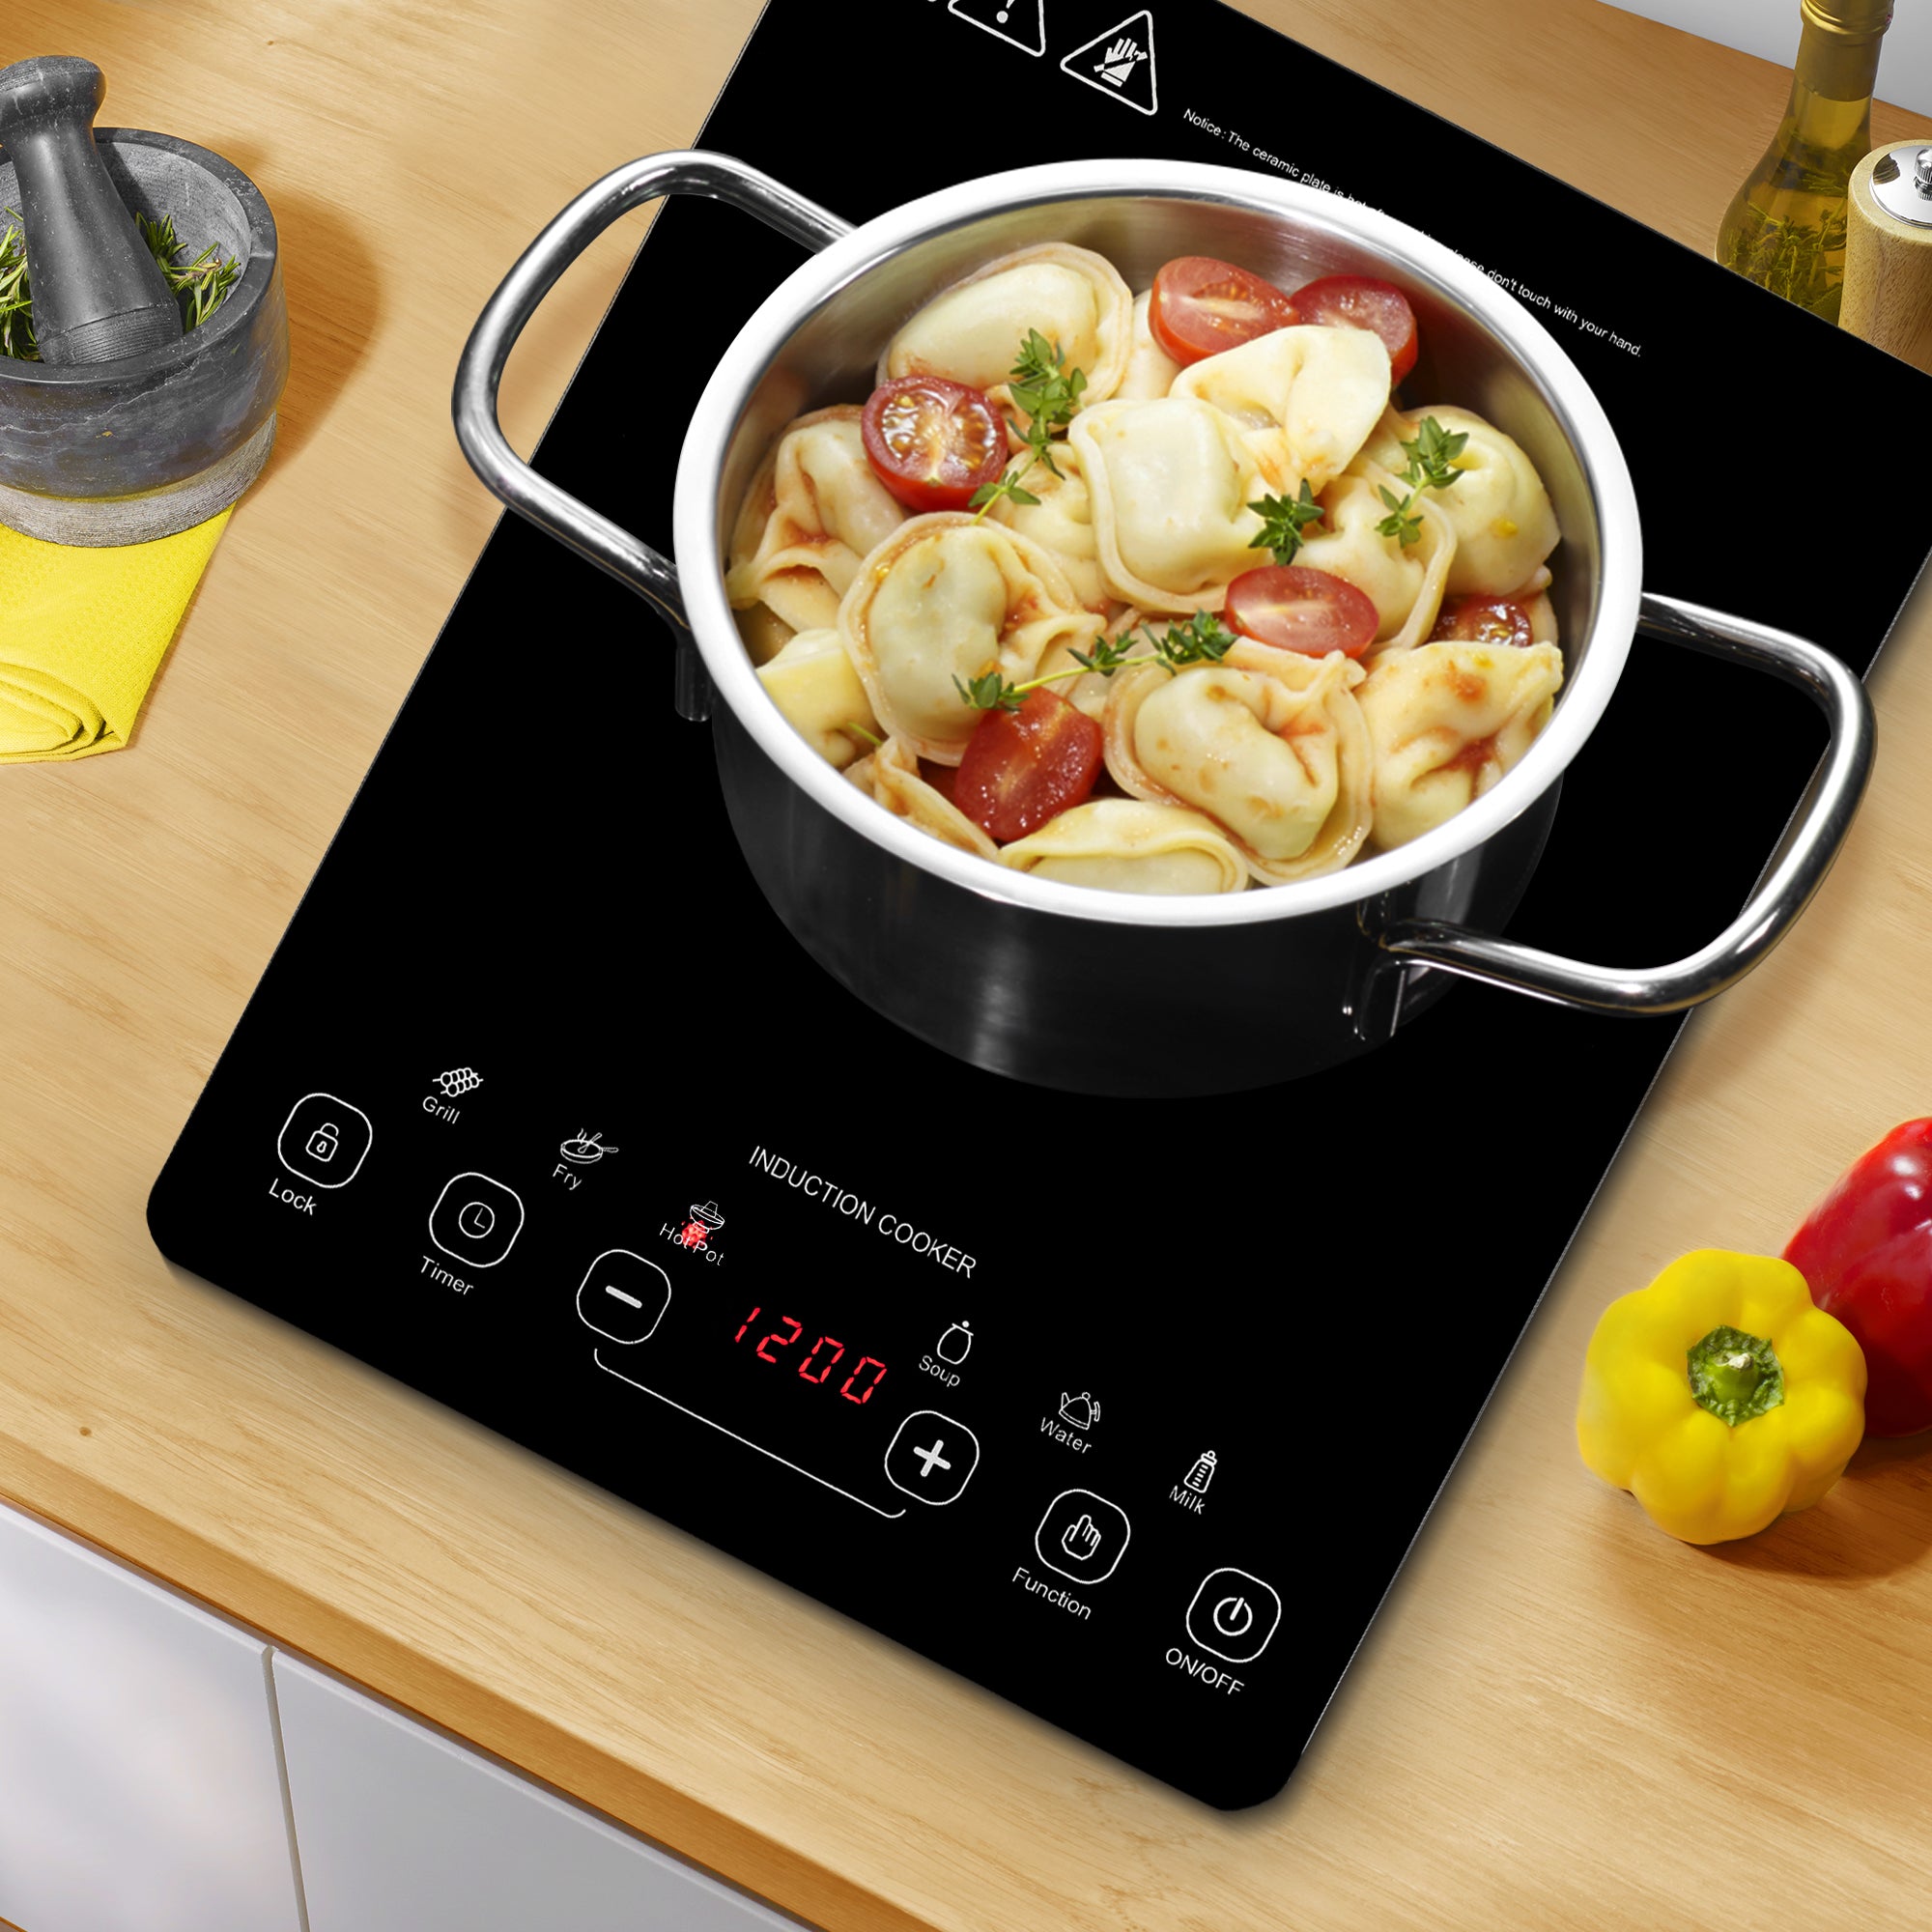 11inch ultra-handy induction cooktop is suitable for cooking the dumpling by stainless steel and cast iron cookware